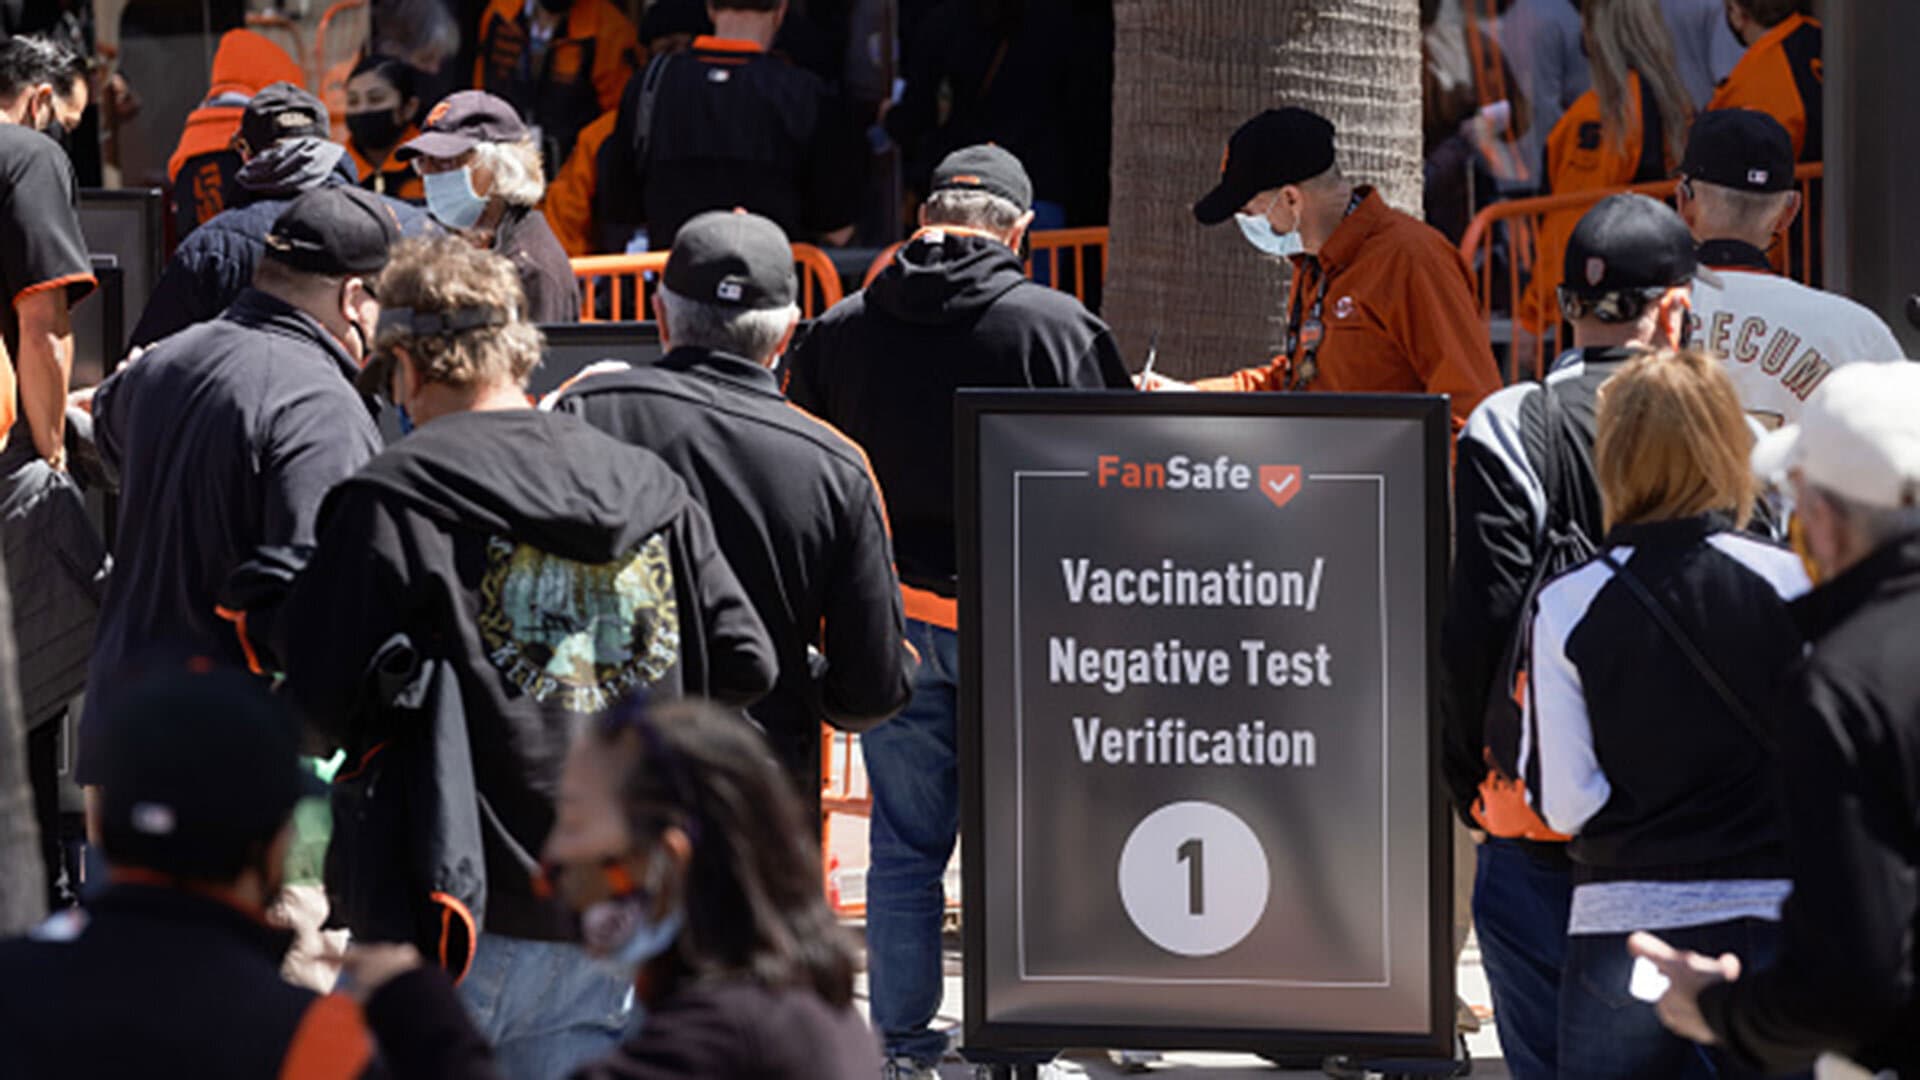 Vaccine verification site at Giants baseball game